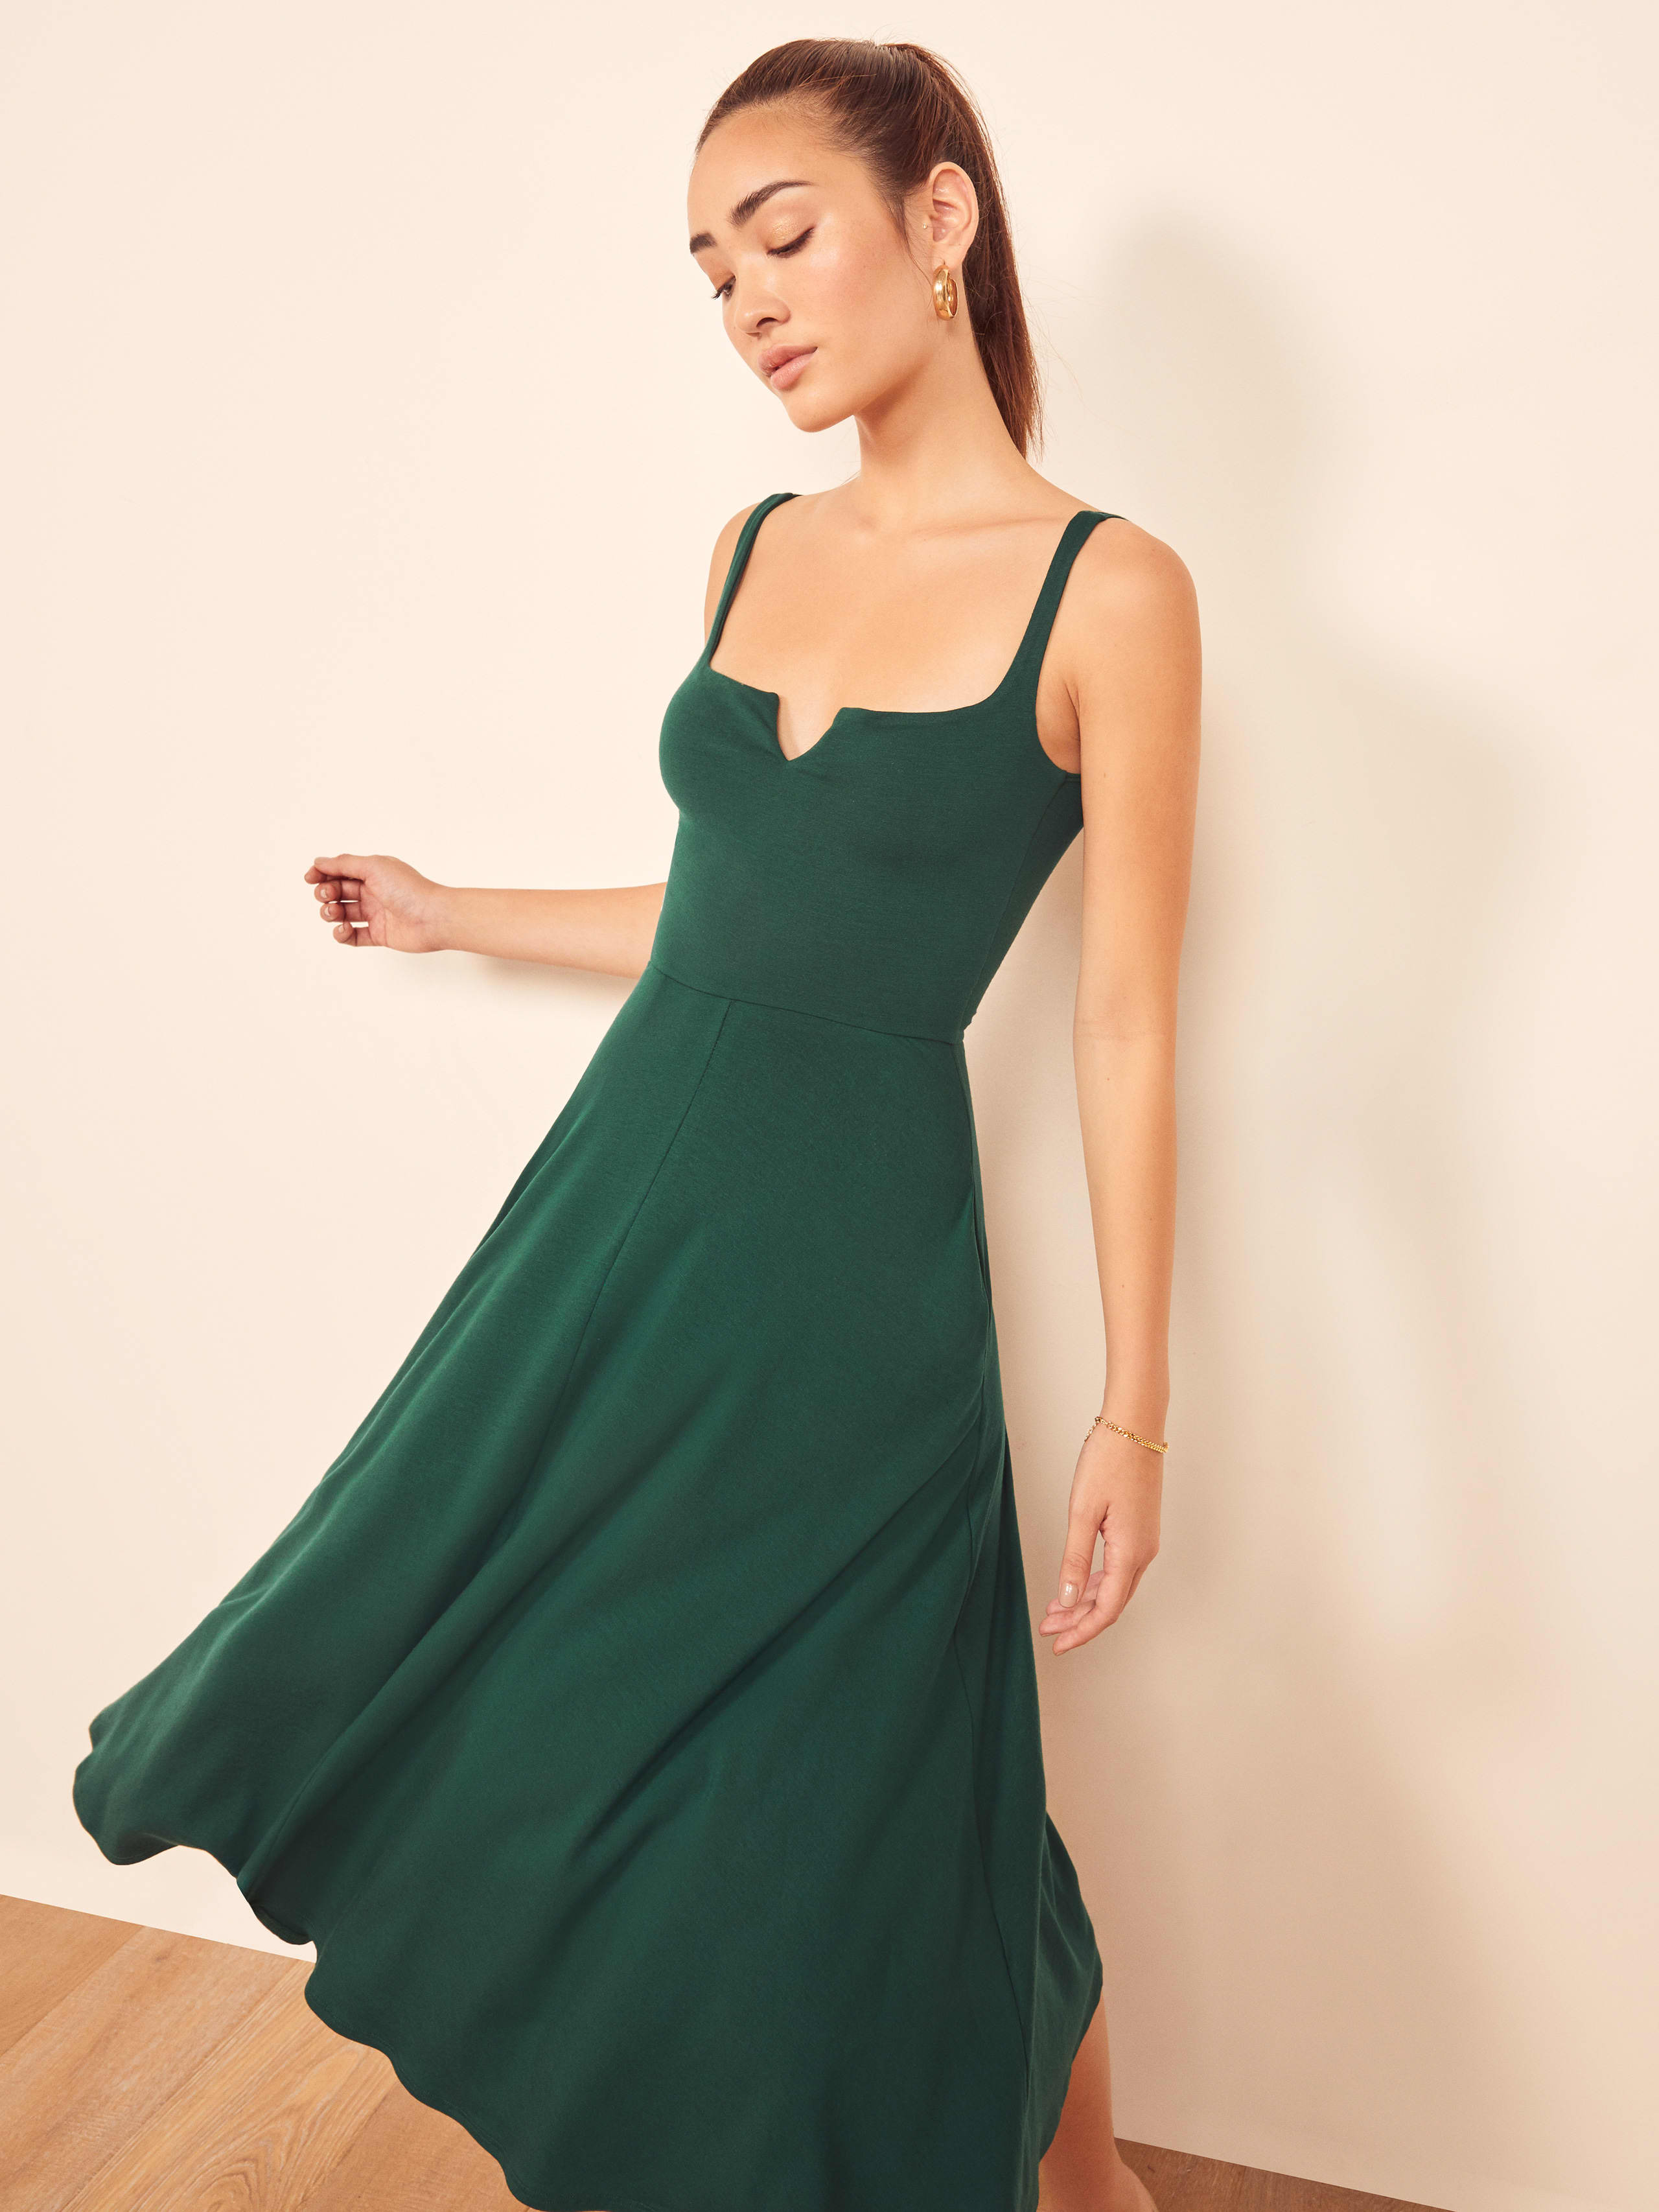 Mary Dress - Reformation